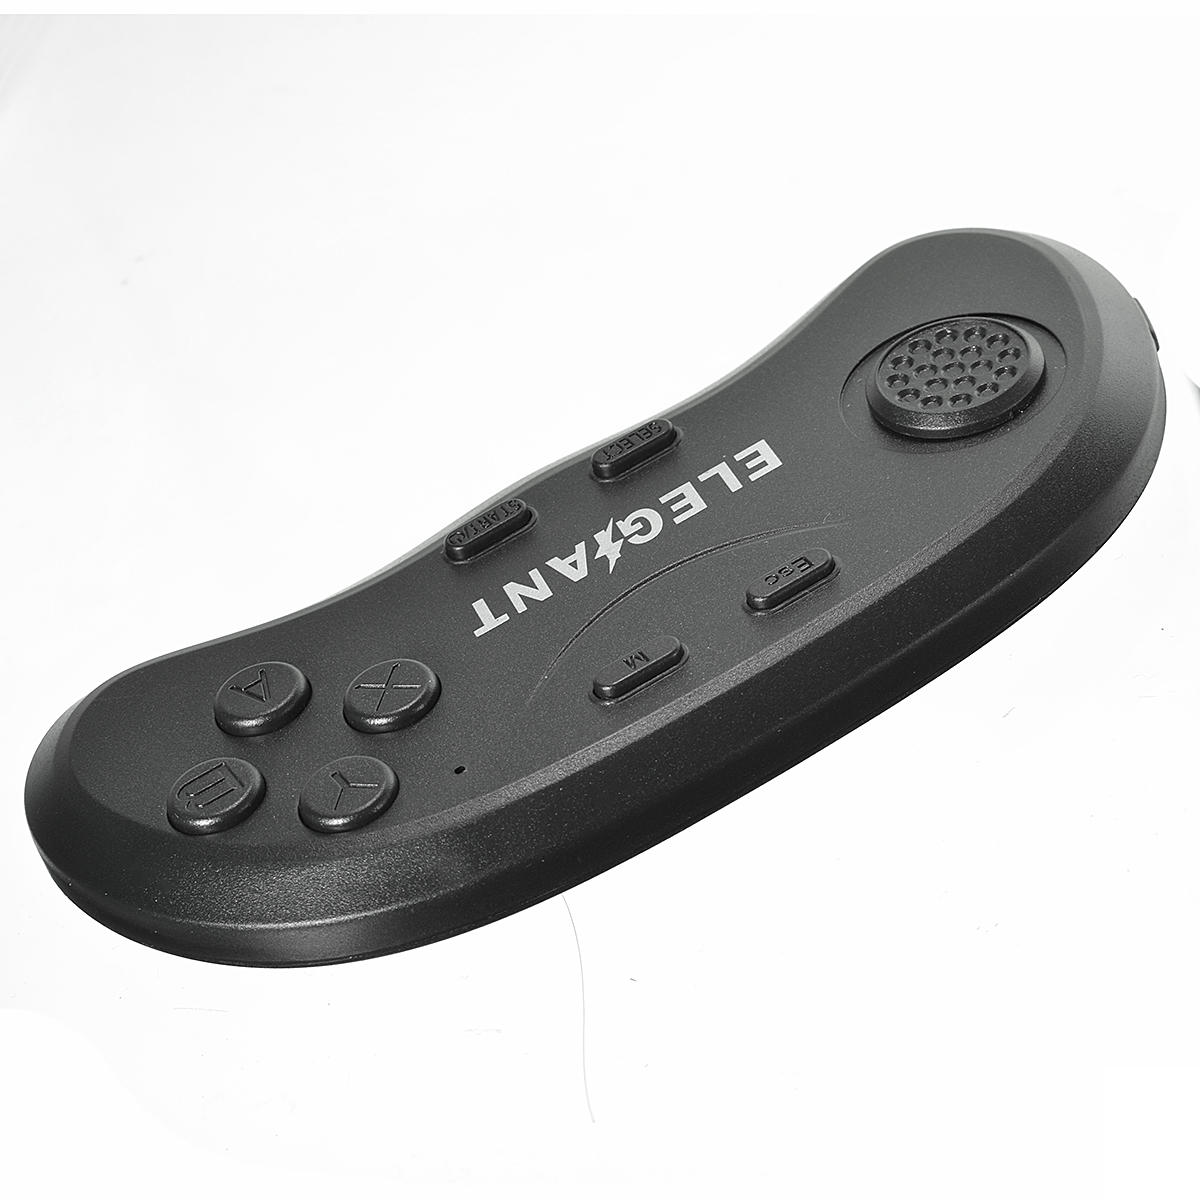 2 Generation bluetooth 3.0 VR Glasses Remote Control Gamepad For Android IOS PC